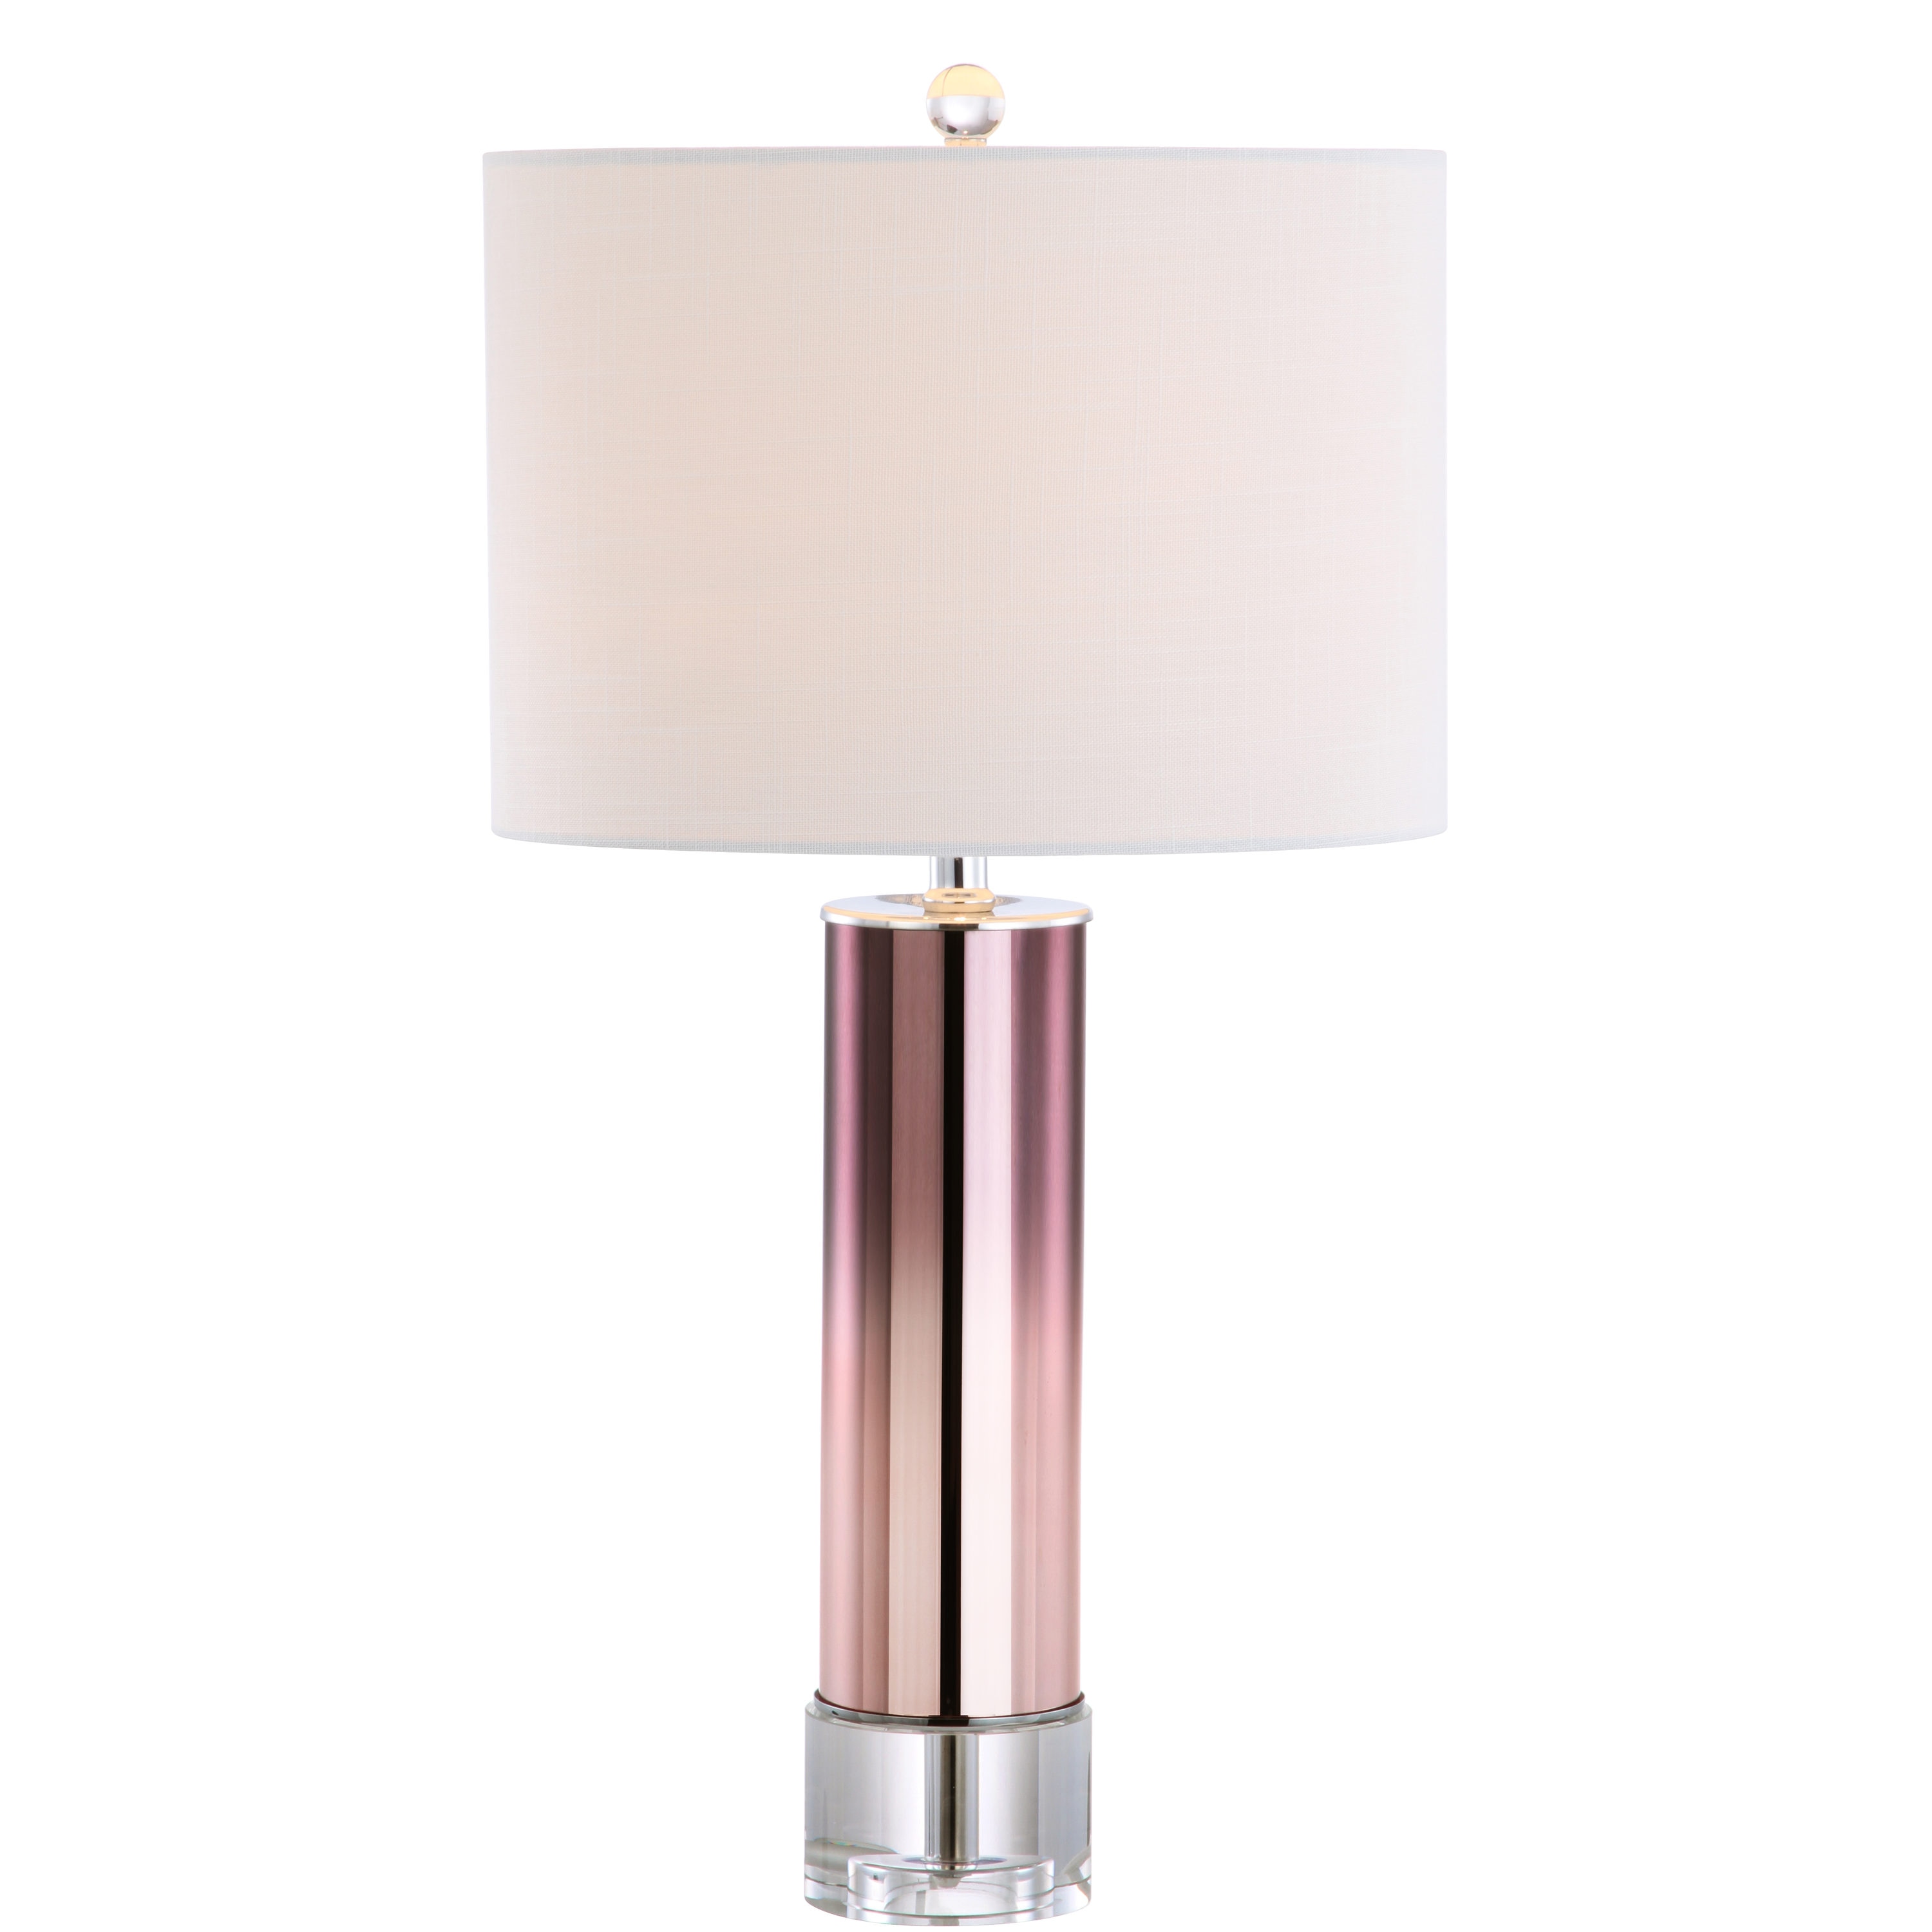 Linen Shade In The Table Lamps, Chrome Glass Table Lamp With Pink Shade